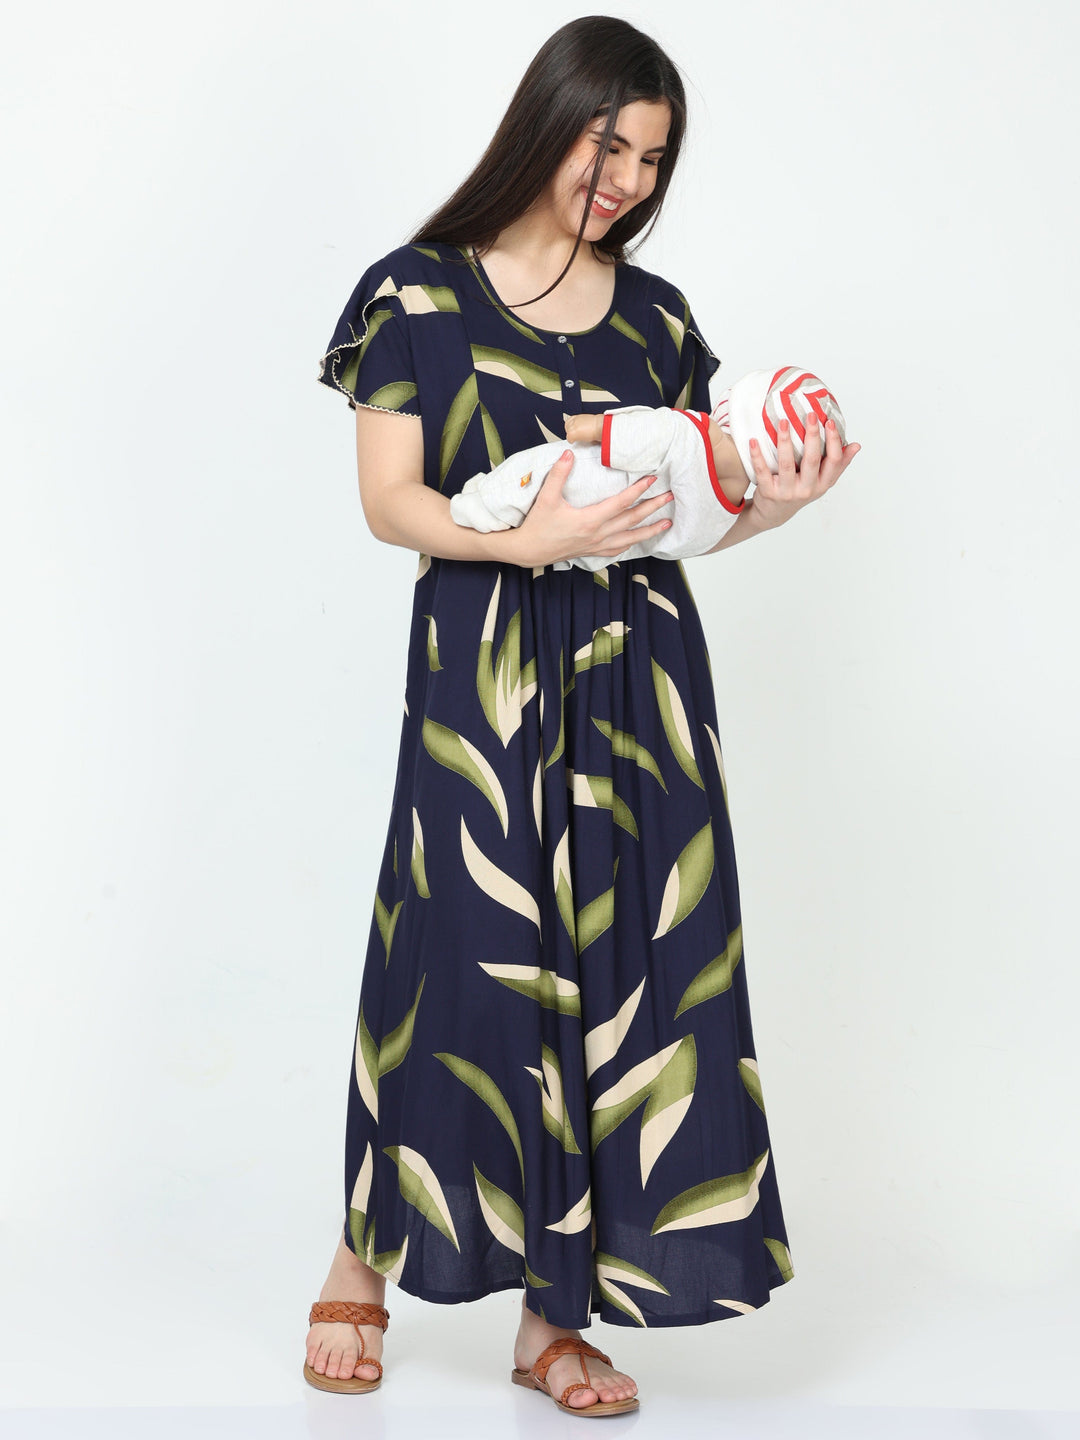  Maternity Dress  Blue And Green Nighty - Maternity Nighties Online India- 9shines label 